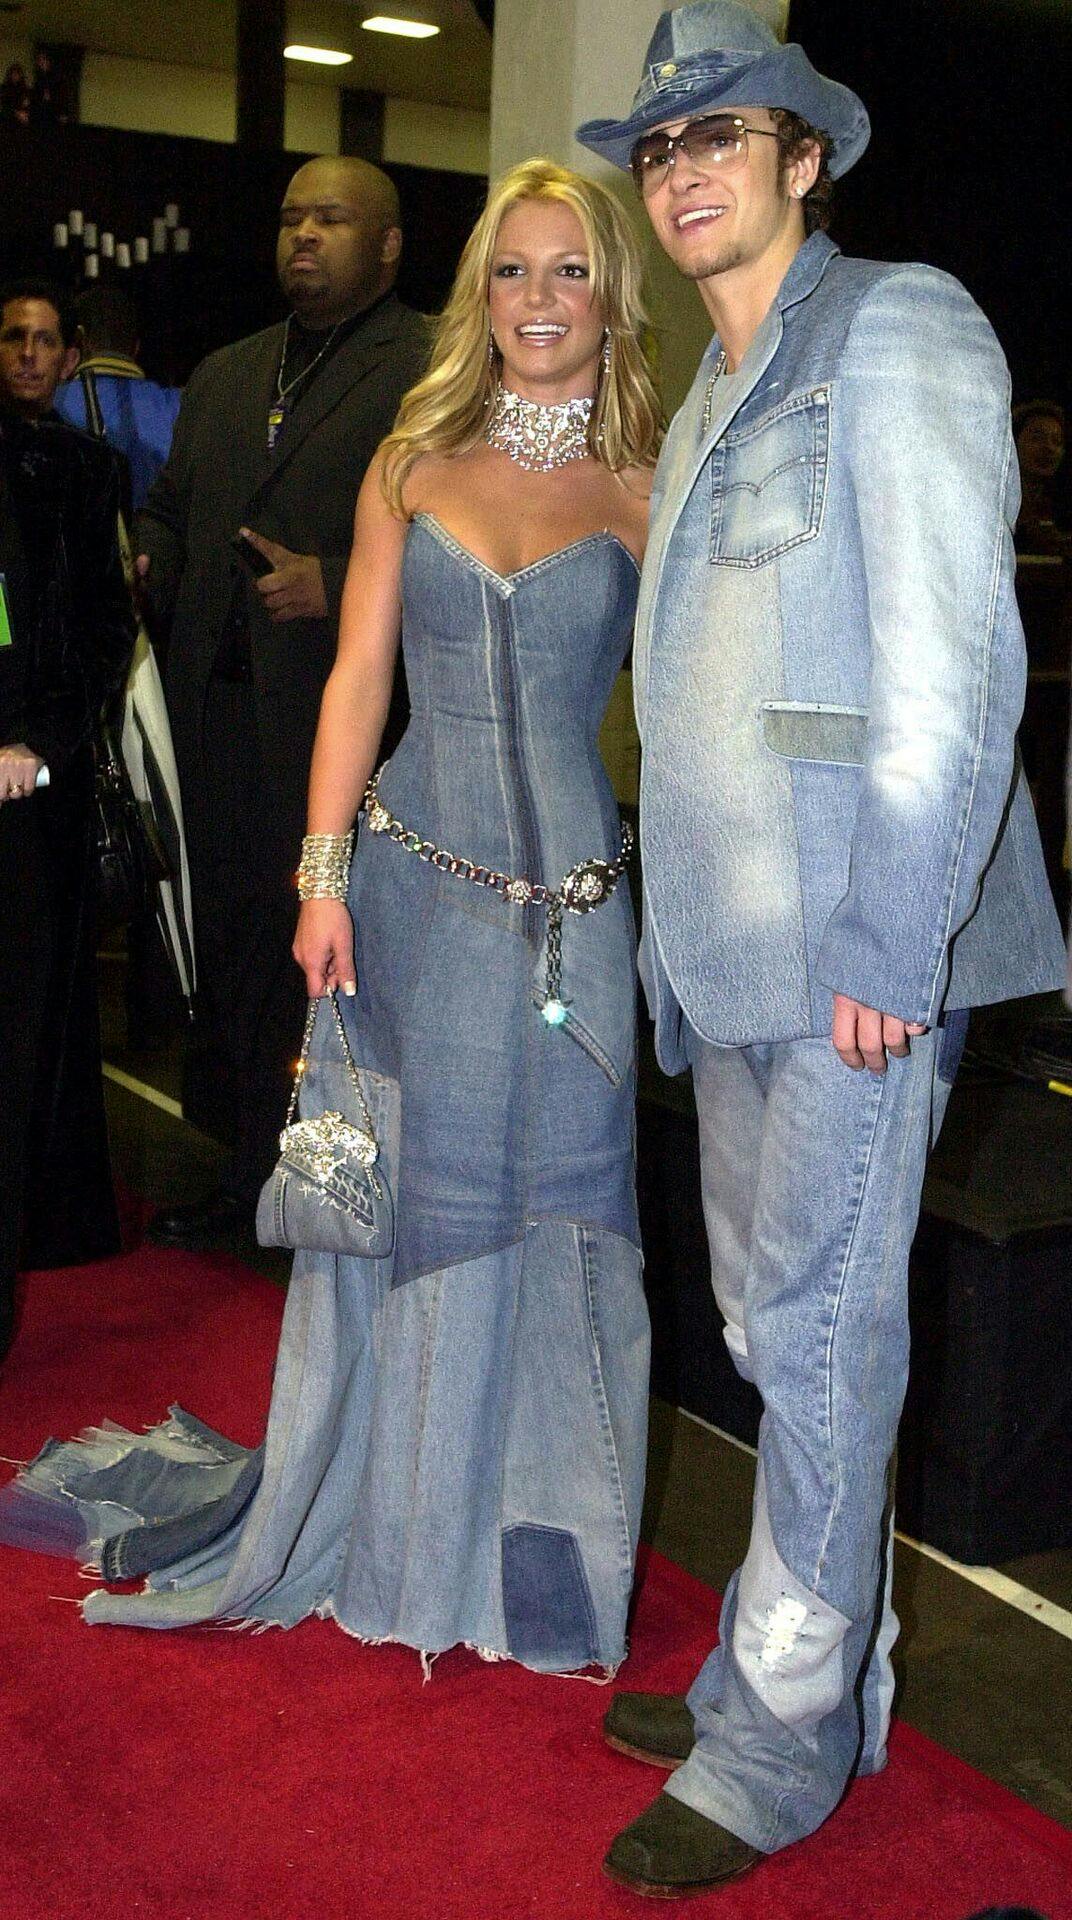 Pop star Britney Spears (l) and her boyfriend, singer Justin Timberlake of the group NSYNC arrive backstage at the 28th Annual American Music Awards 08 January 2001 in Los Angeles. Spears is co-hosting the award show this year along with rapper/actor LL Cool J. AFP Photo Lucy NICHOLSON